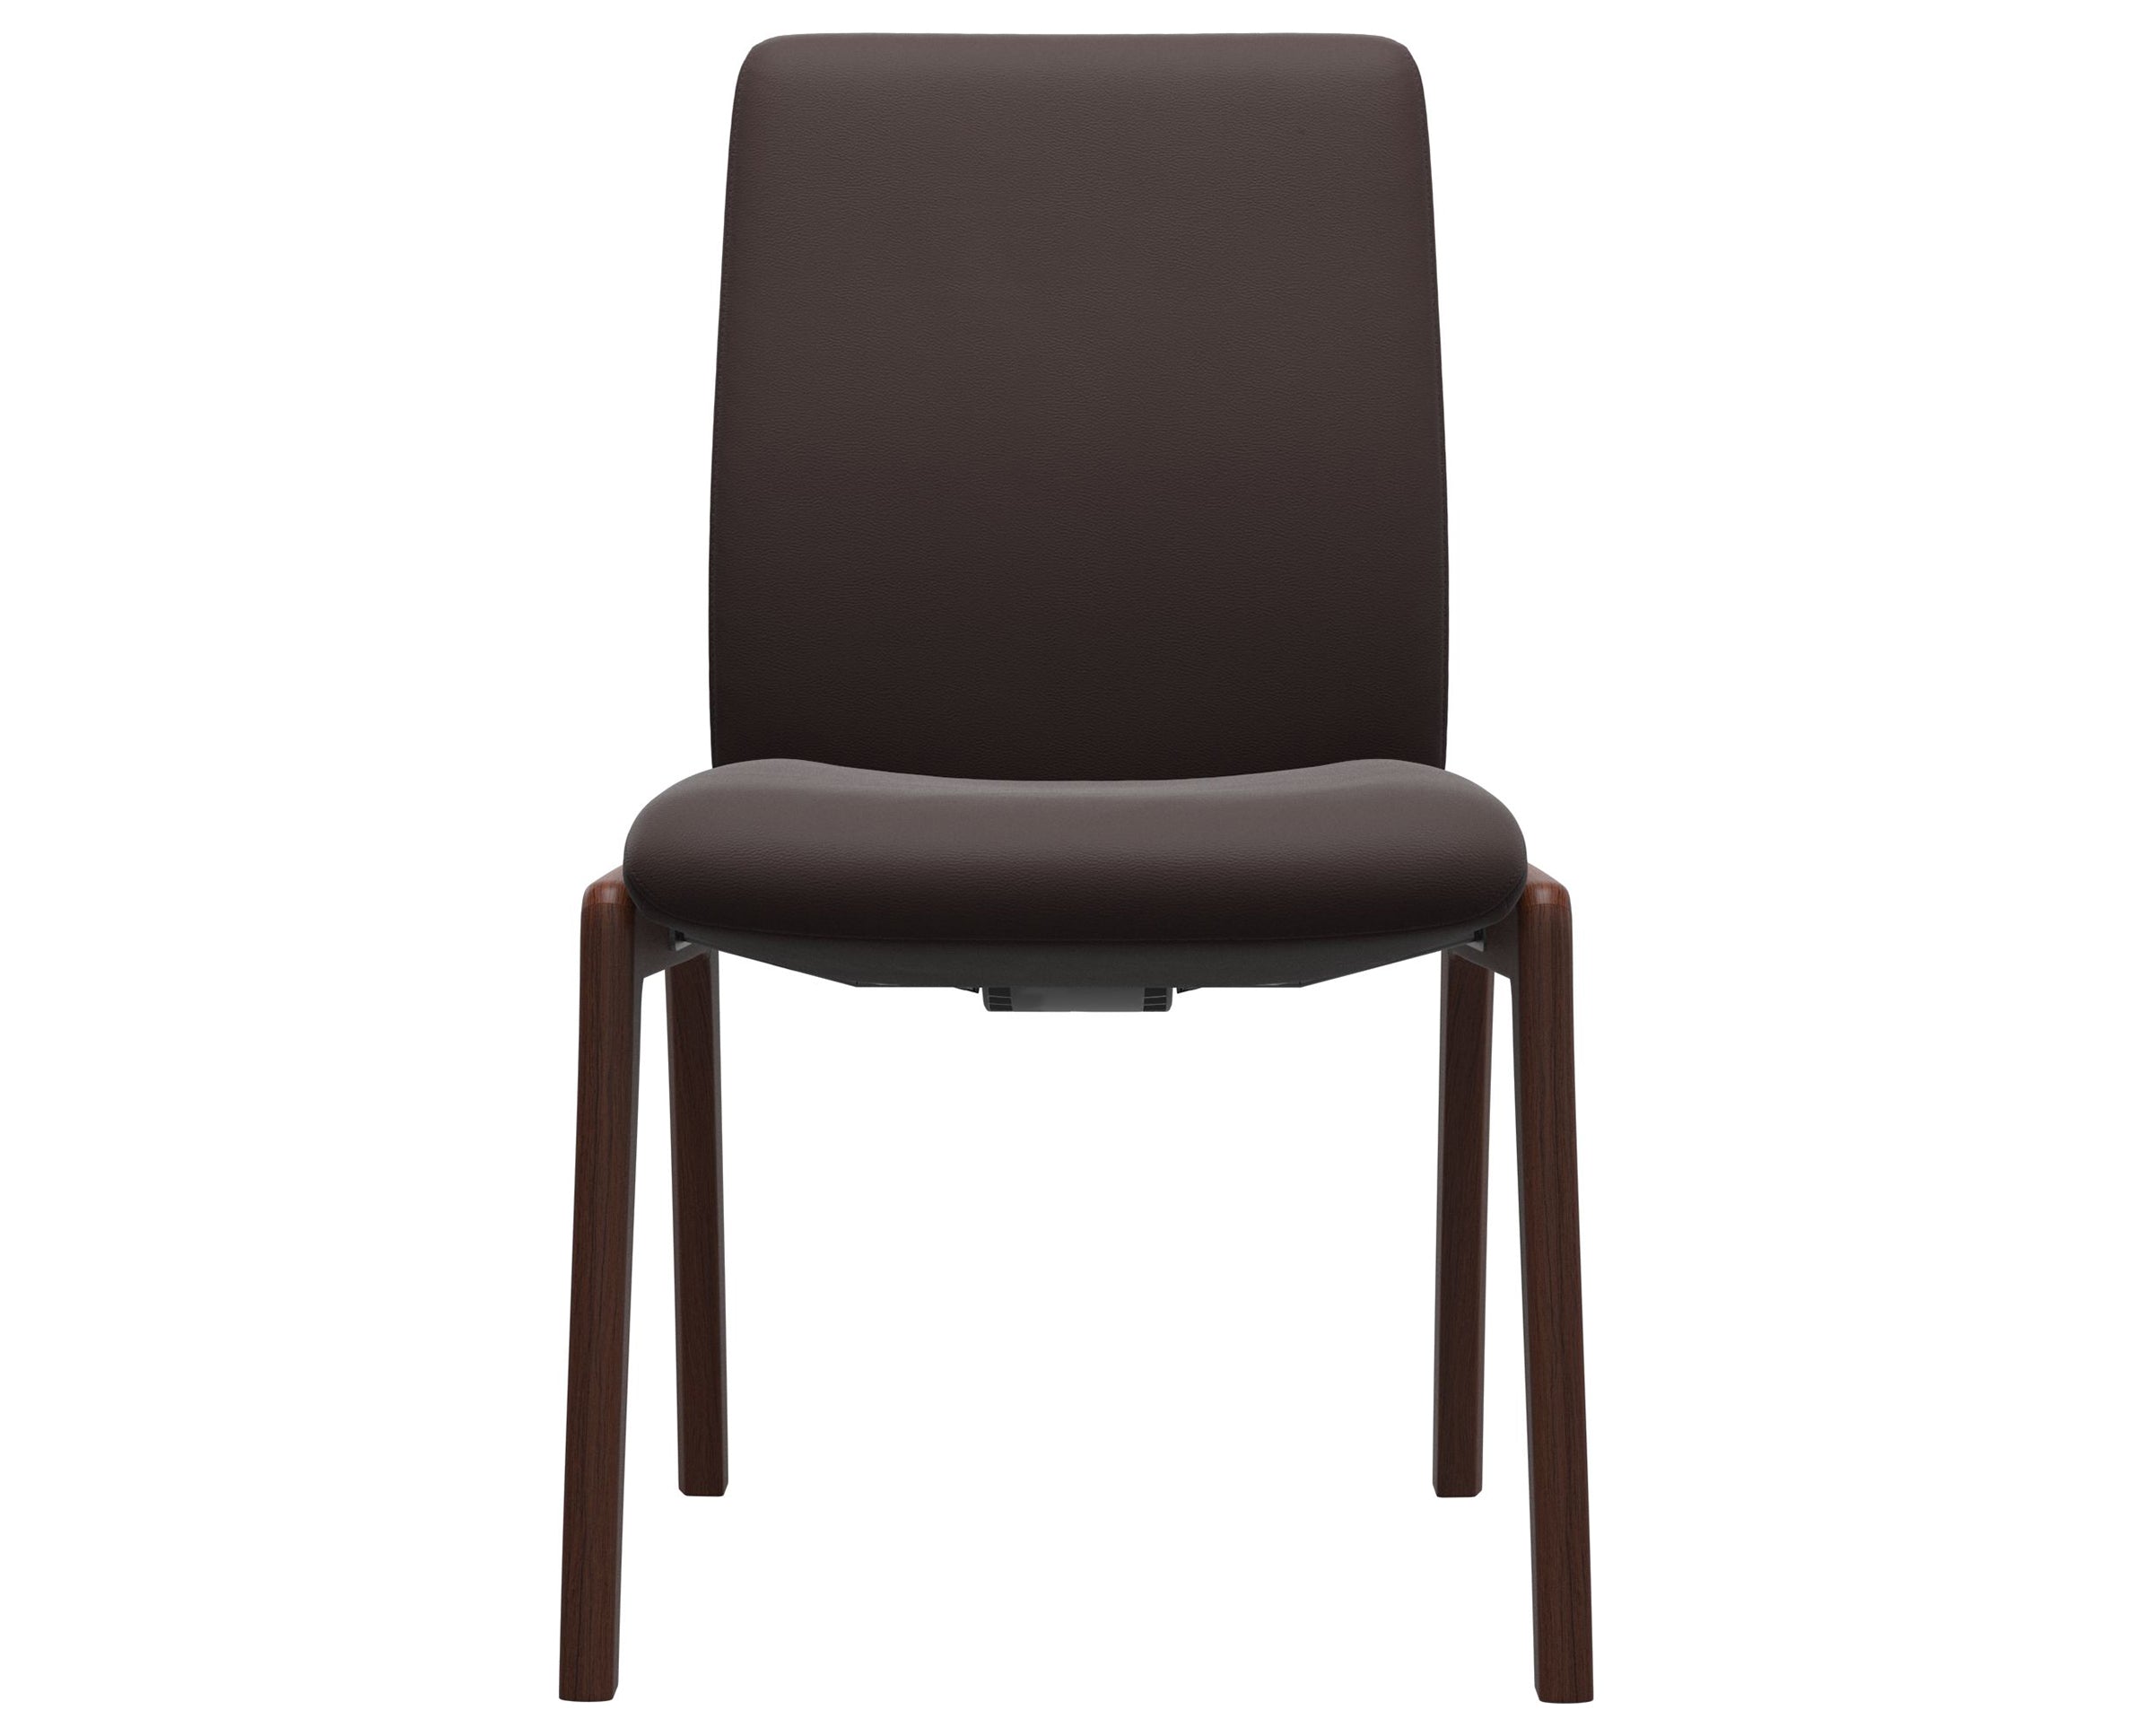 Paloma Leather Chocolate and Walnut Base | Stressless Laurel Low Back D100 Dining Chair | Valley Ridge Furniture